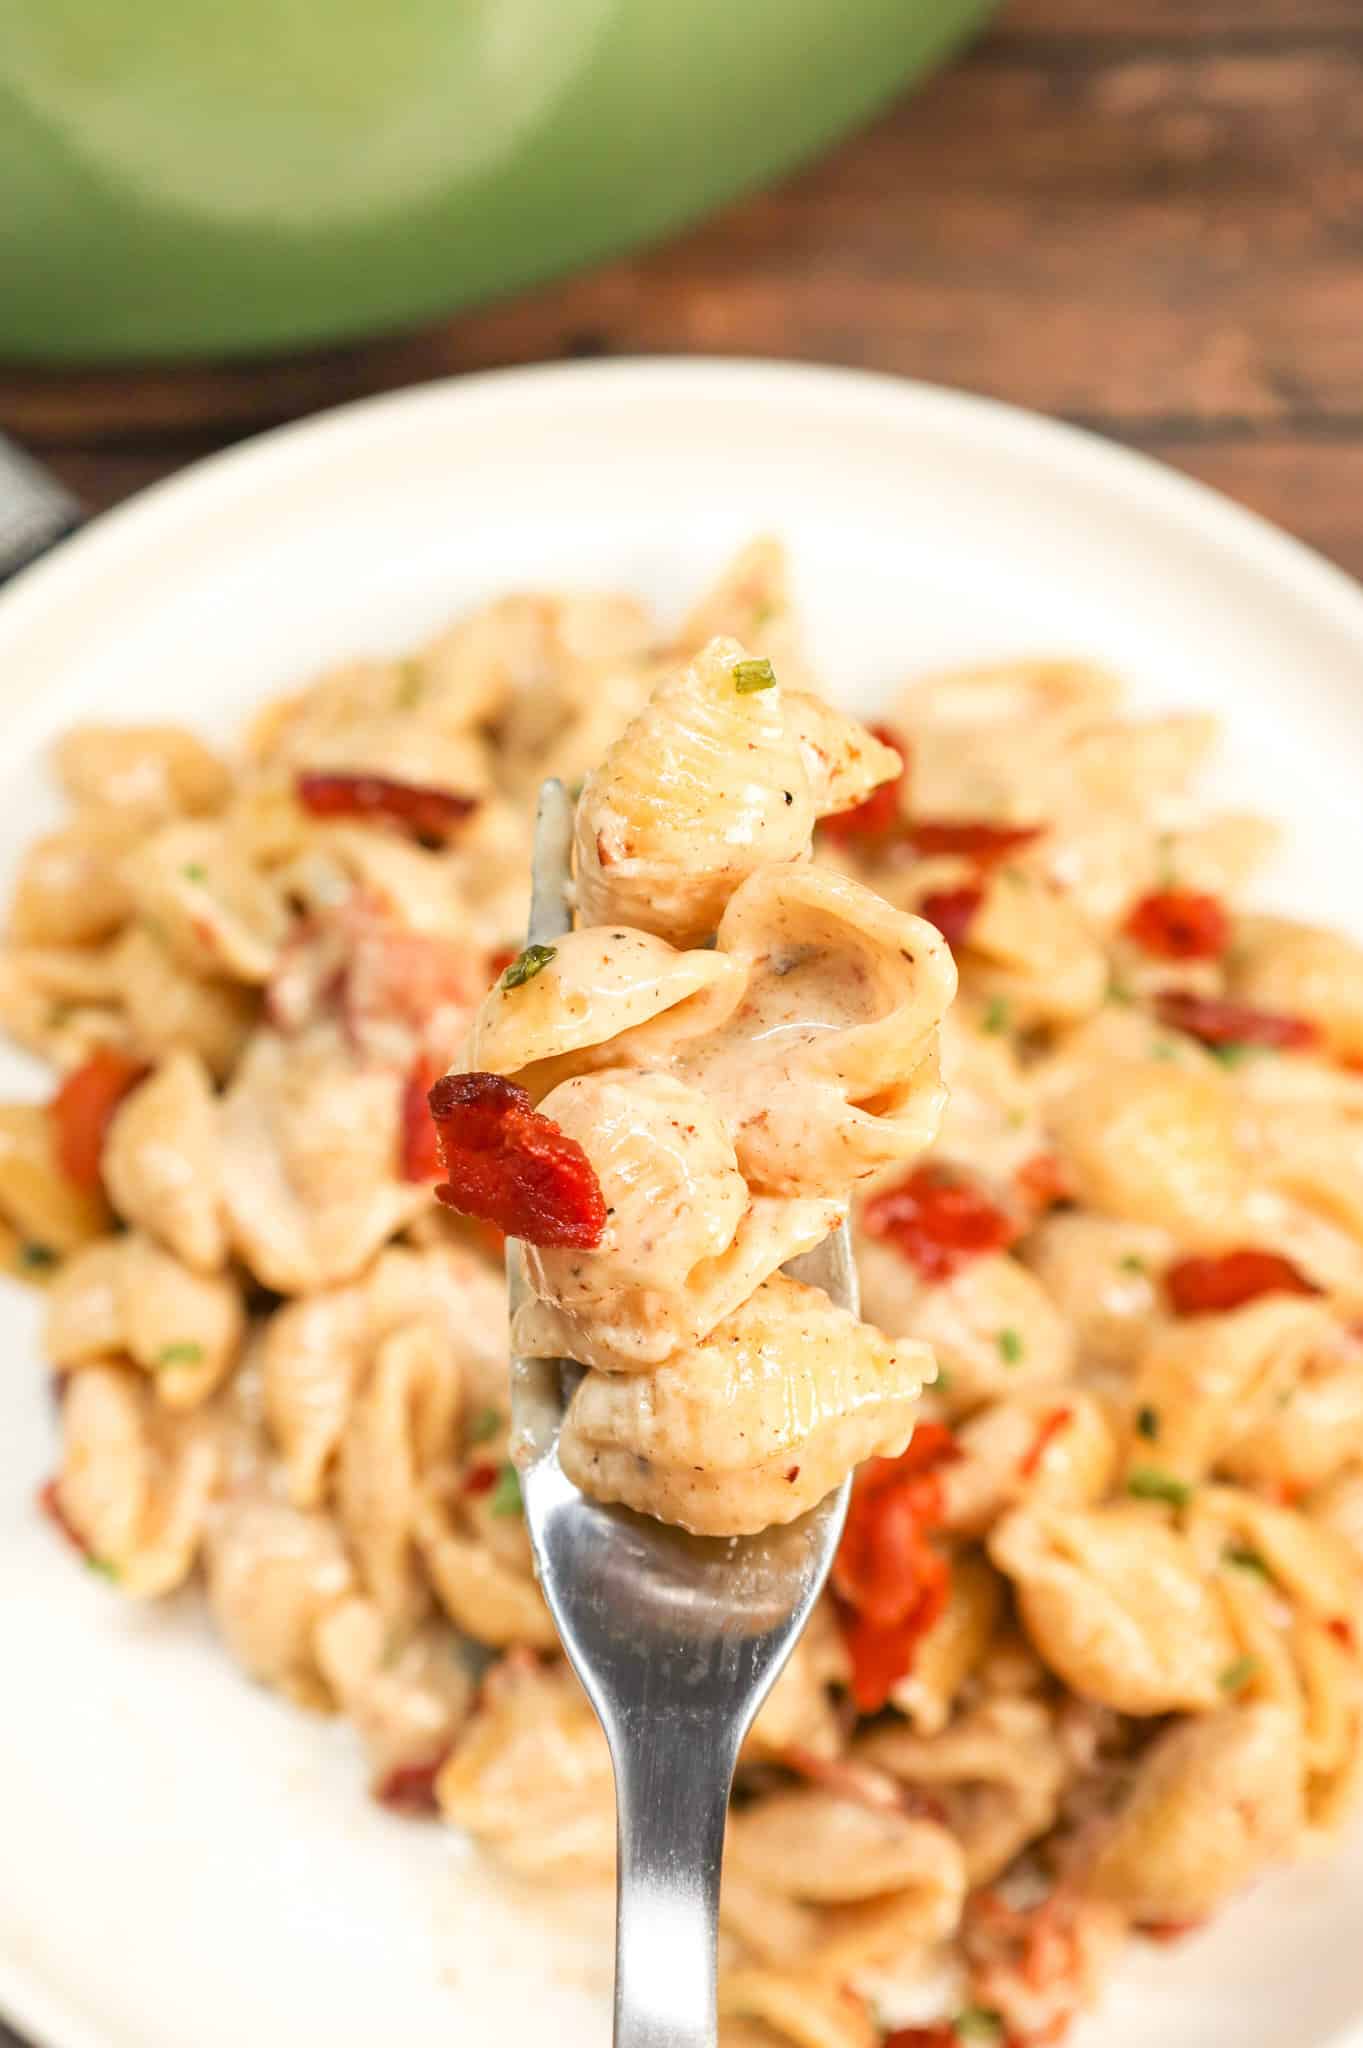 Bacon Pasta is a creamy shell pasta recipe loaded with crispy crumbled bacon pieces and flavoured with garlic and parmesan cheese.